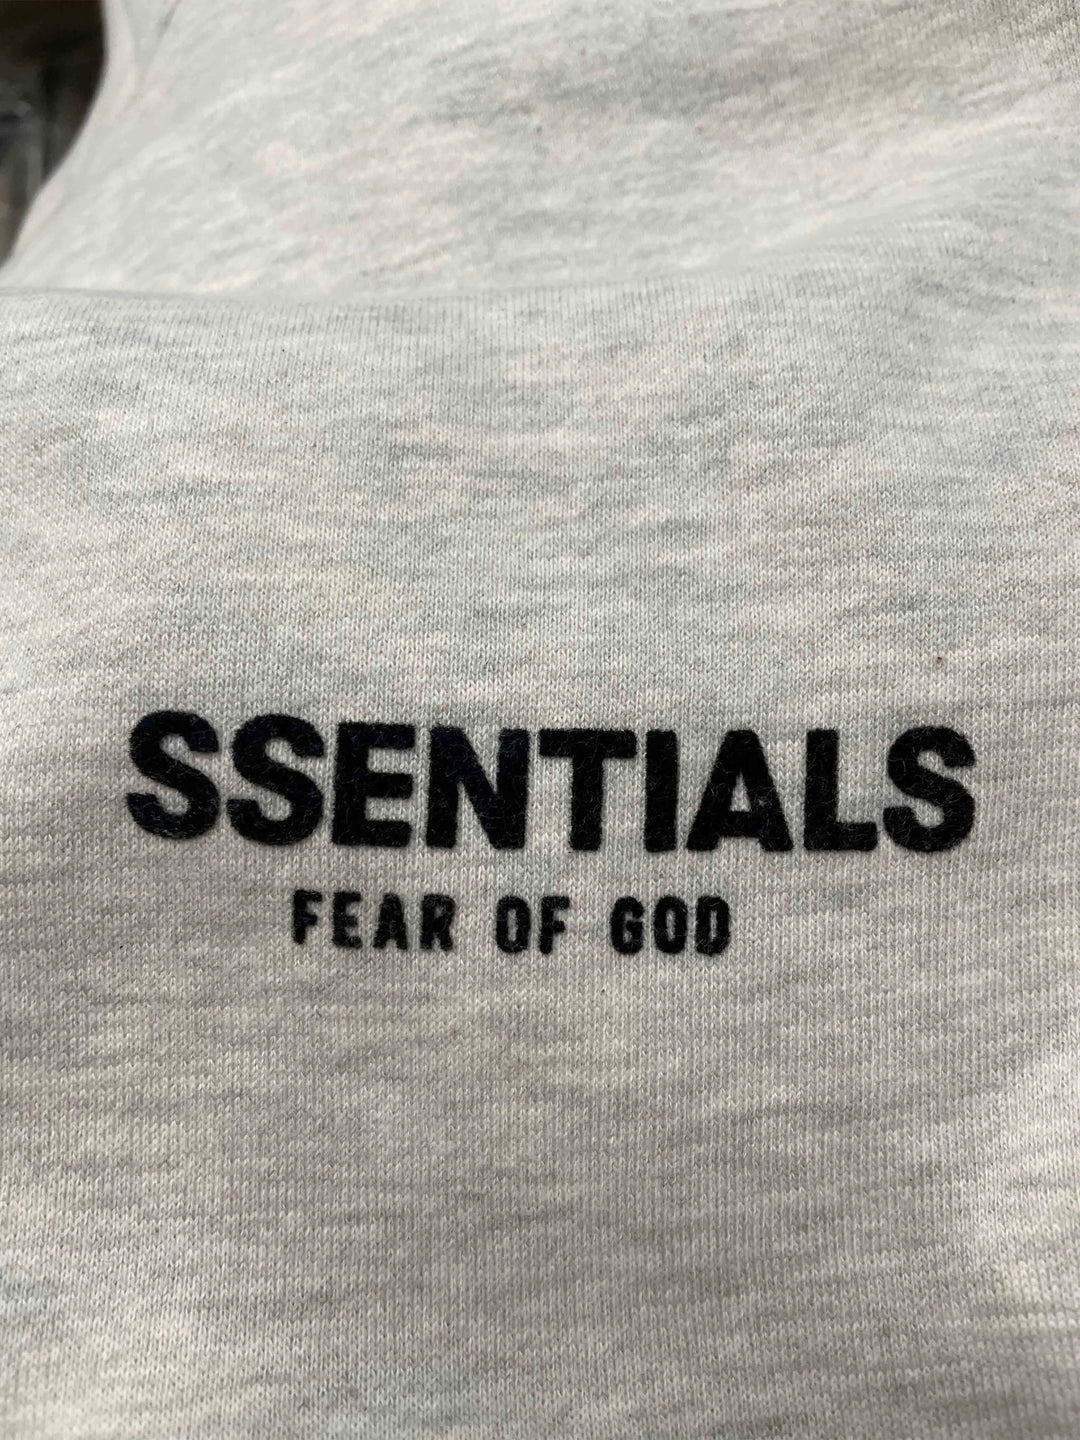 Fear of God Essentials Hoodie Light Oatmeal [SS22] [FACTORY FLAW] Prior